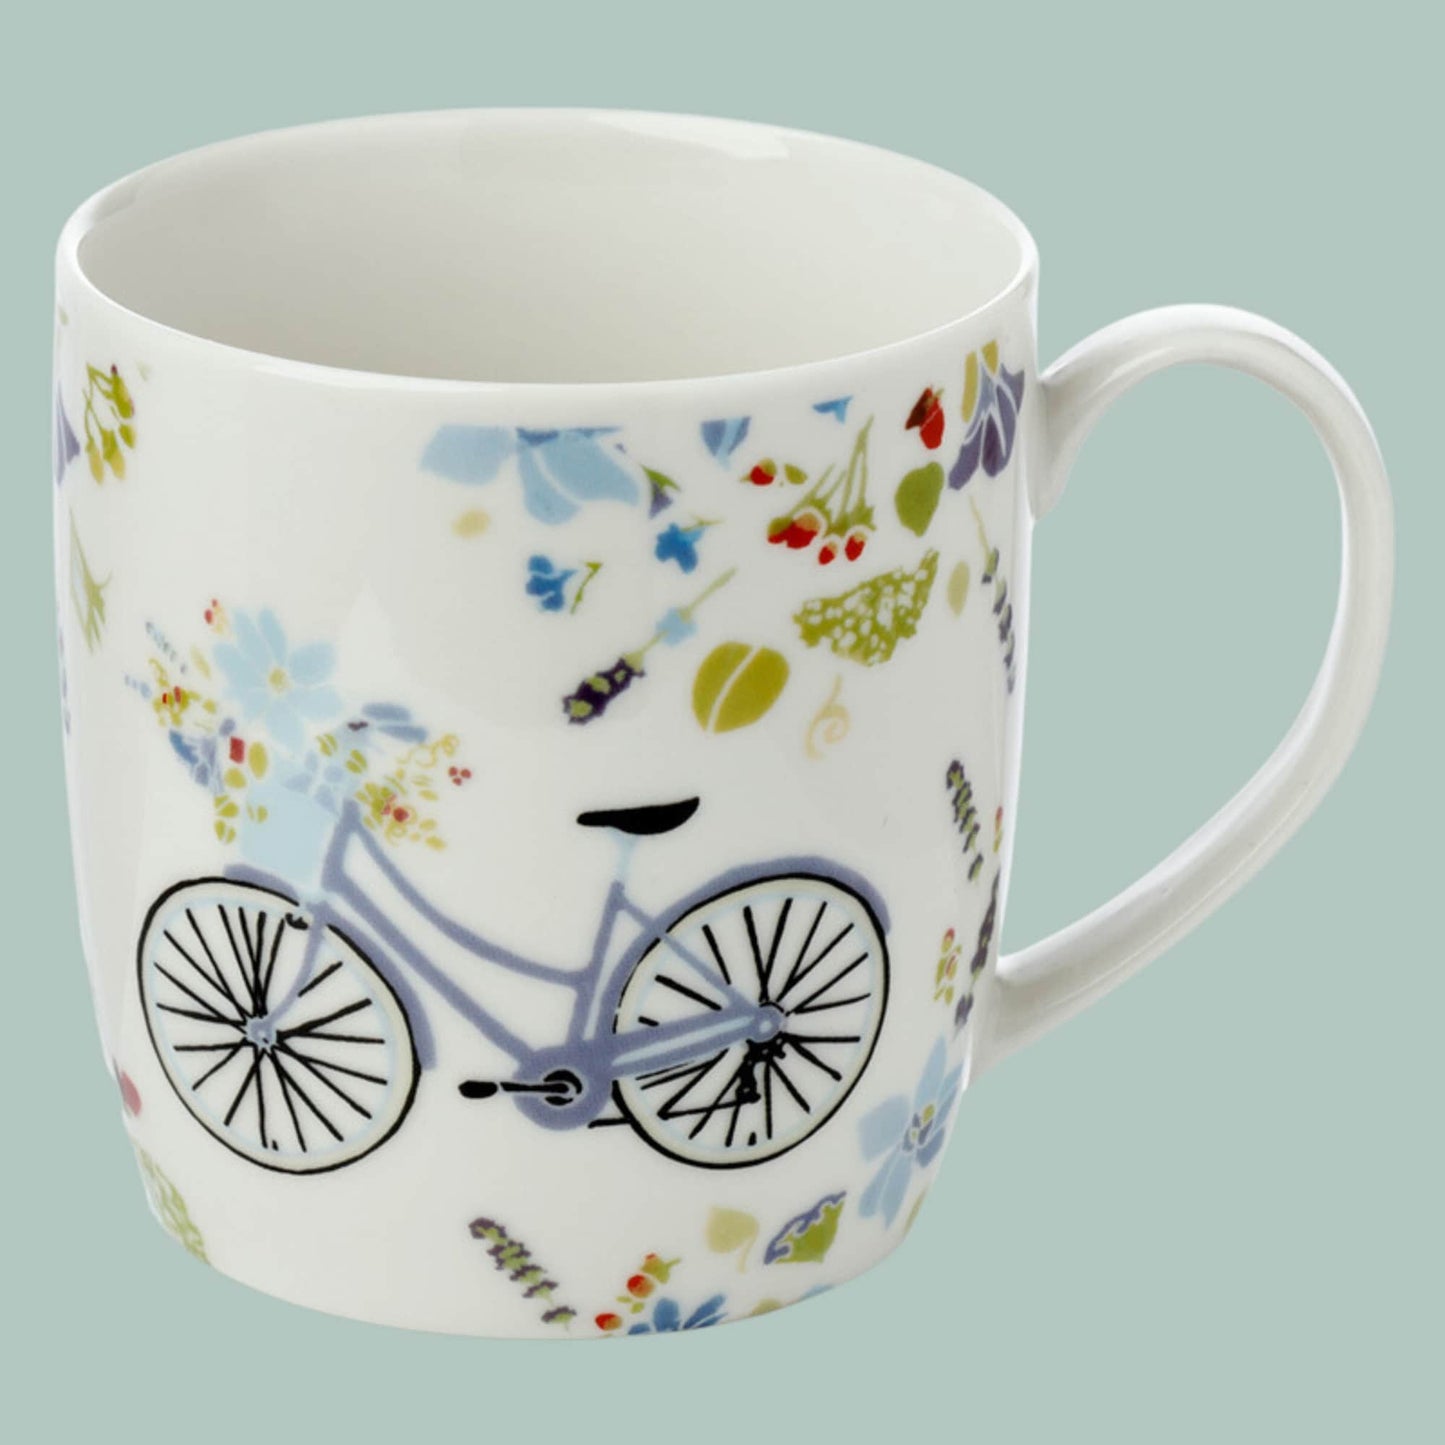 Floral Bicycle Porcelain Mugs Set Julie Dodsworth Beautiful Coffee Mugs Floral Bicycle Design Gift For Bicycle Lover Horticulturist Present